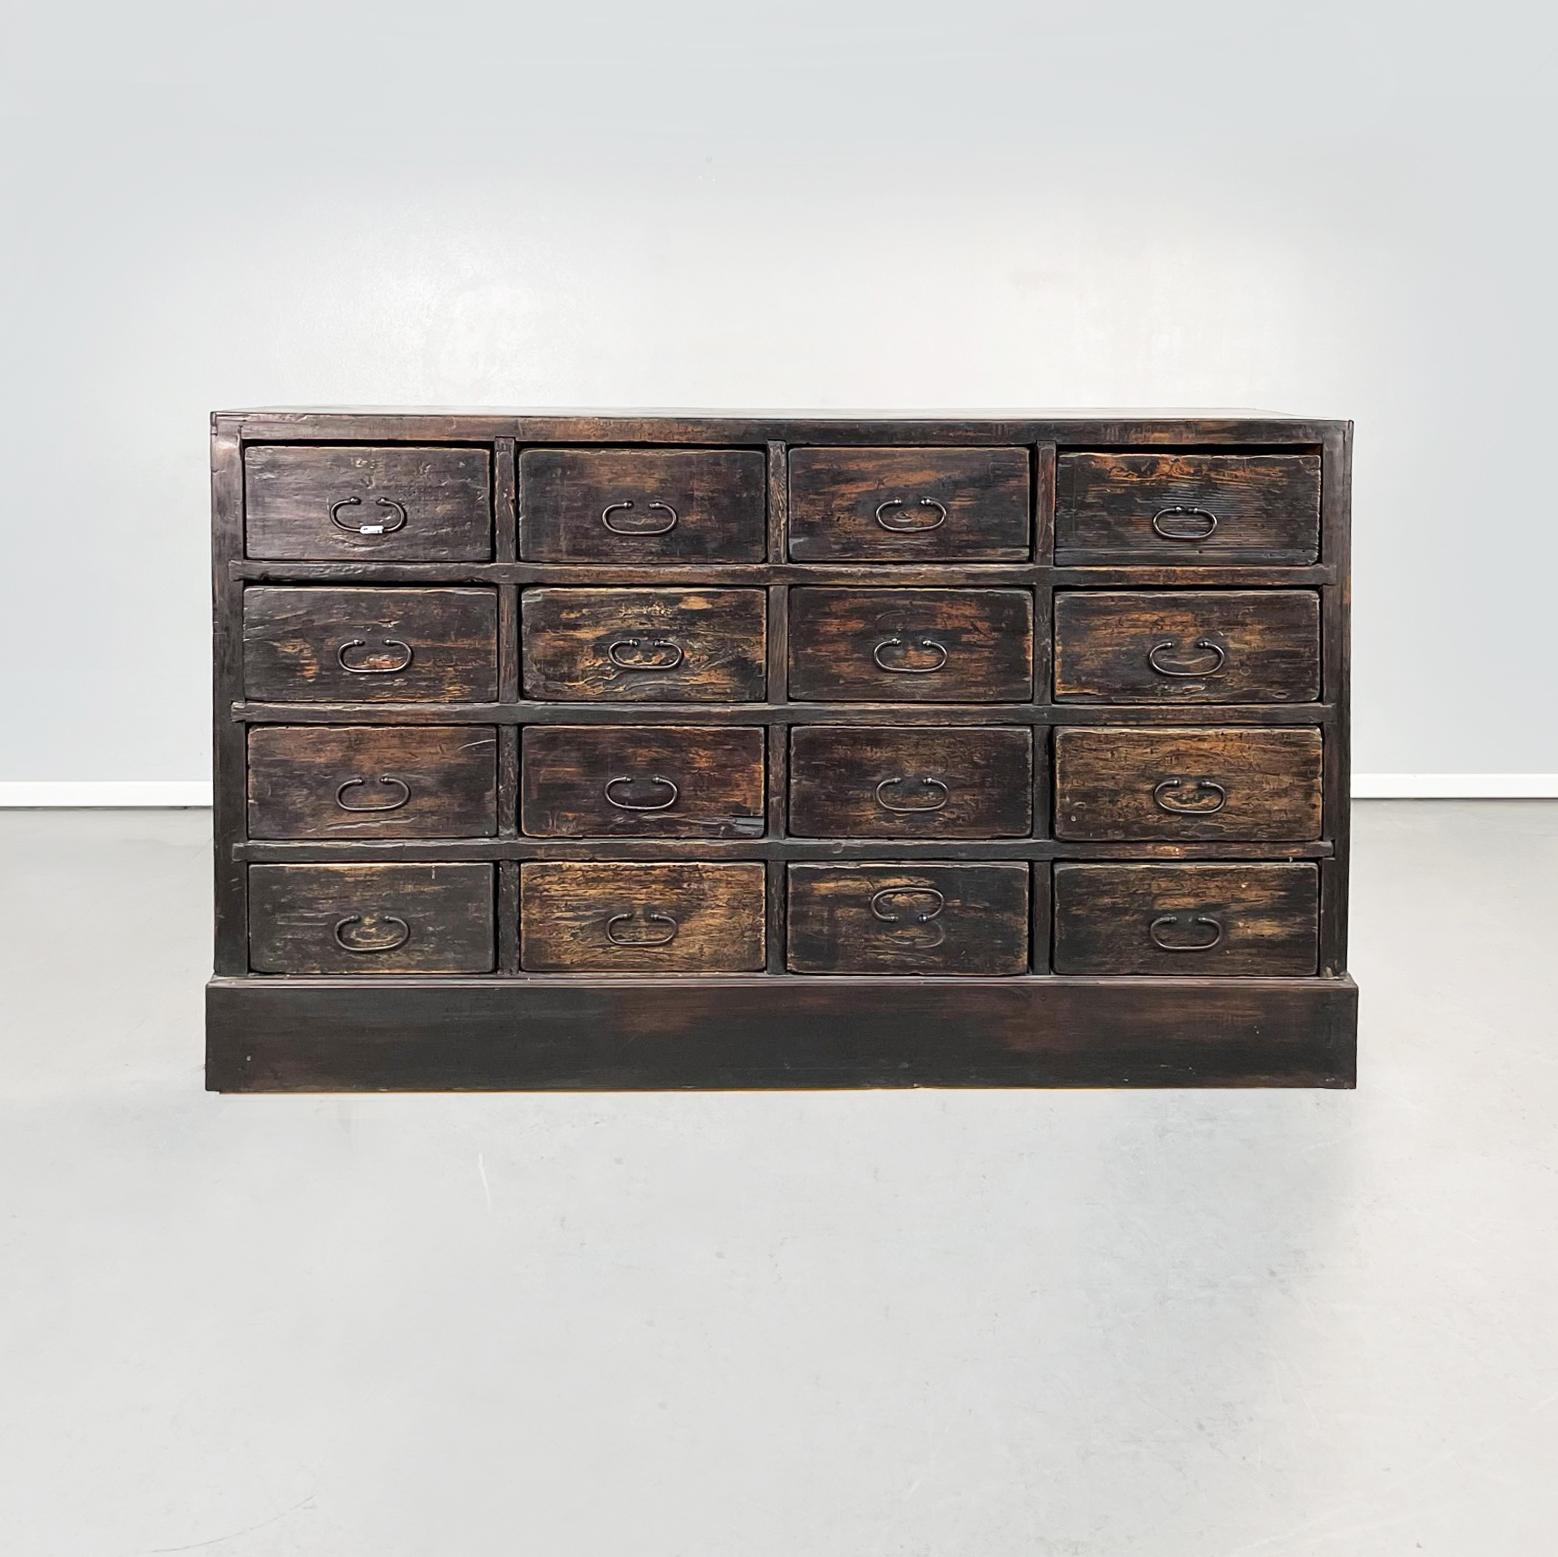 Italian Belle Époque antique Wooden chest of drawers, 1900s
Chest of drawers with rectangular base in dark wood. The cabinet has 16 drawers divided into 4 rows. Oval metal handles.

Early 1900s.

Good conditions. It shows signs of use and time,